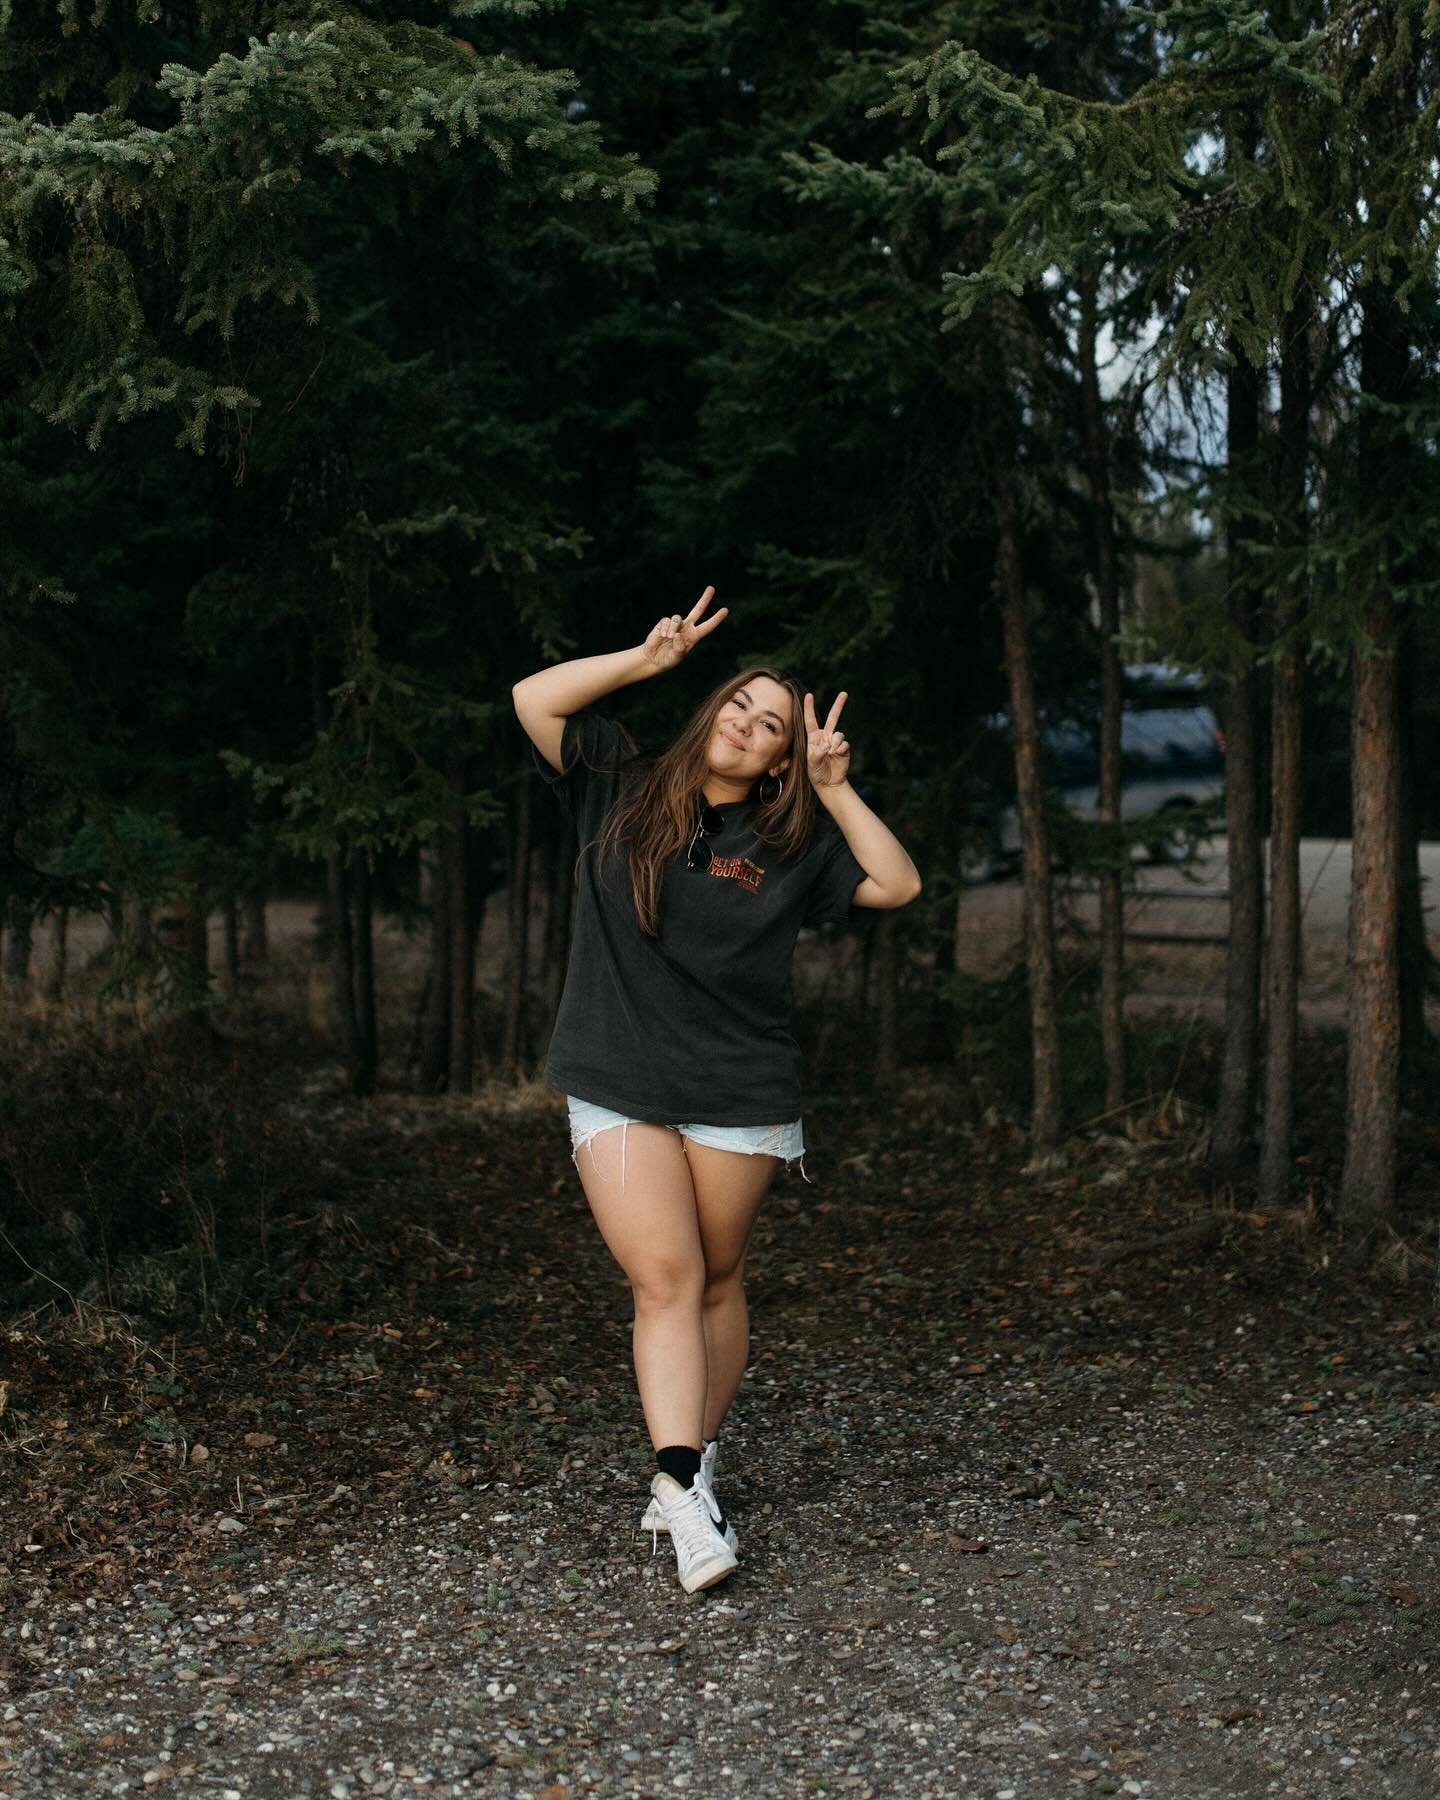 monday brain dump (vent sesh?), join me in the comments

I am so, so excited for summer. I am the happiest version of myself galavanting around in the woods.

caring about what other people think is SO exhausting and my goal for this year is to care 